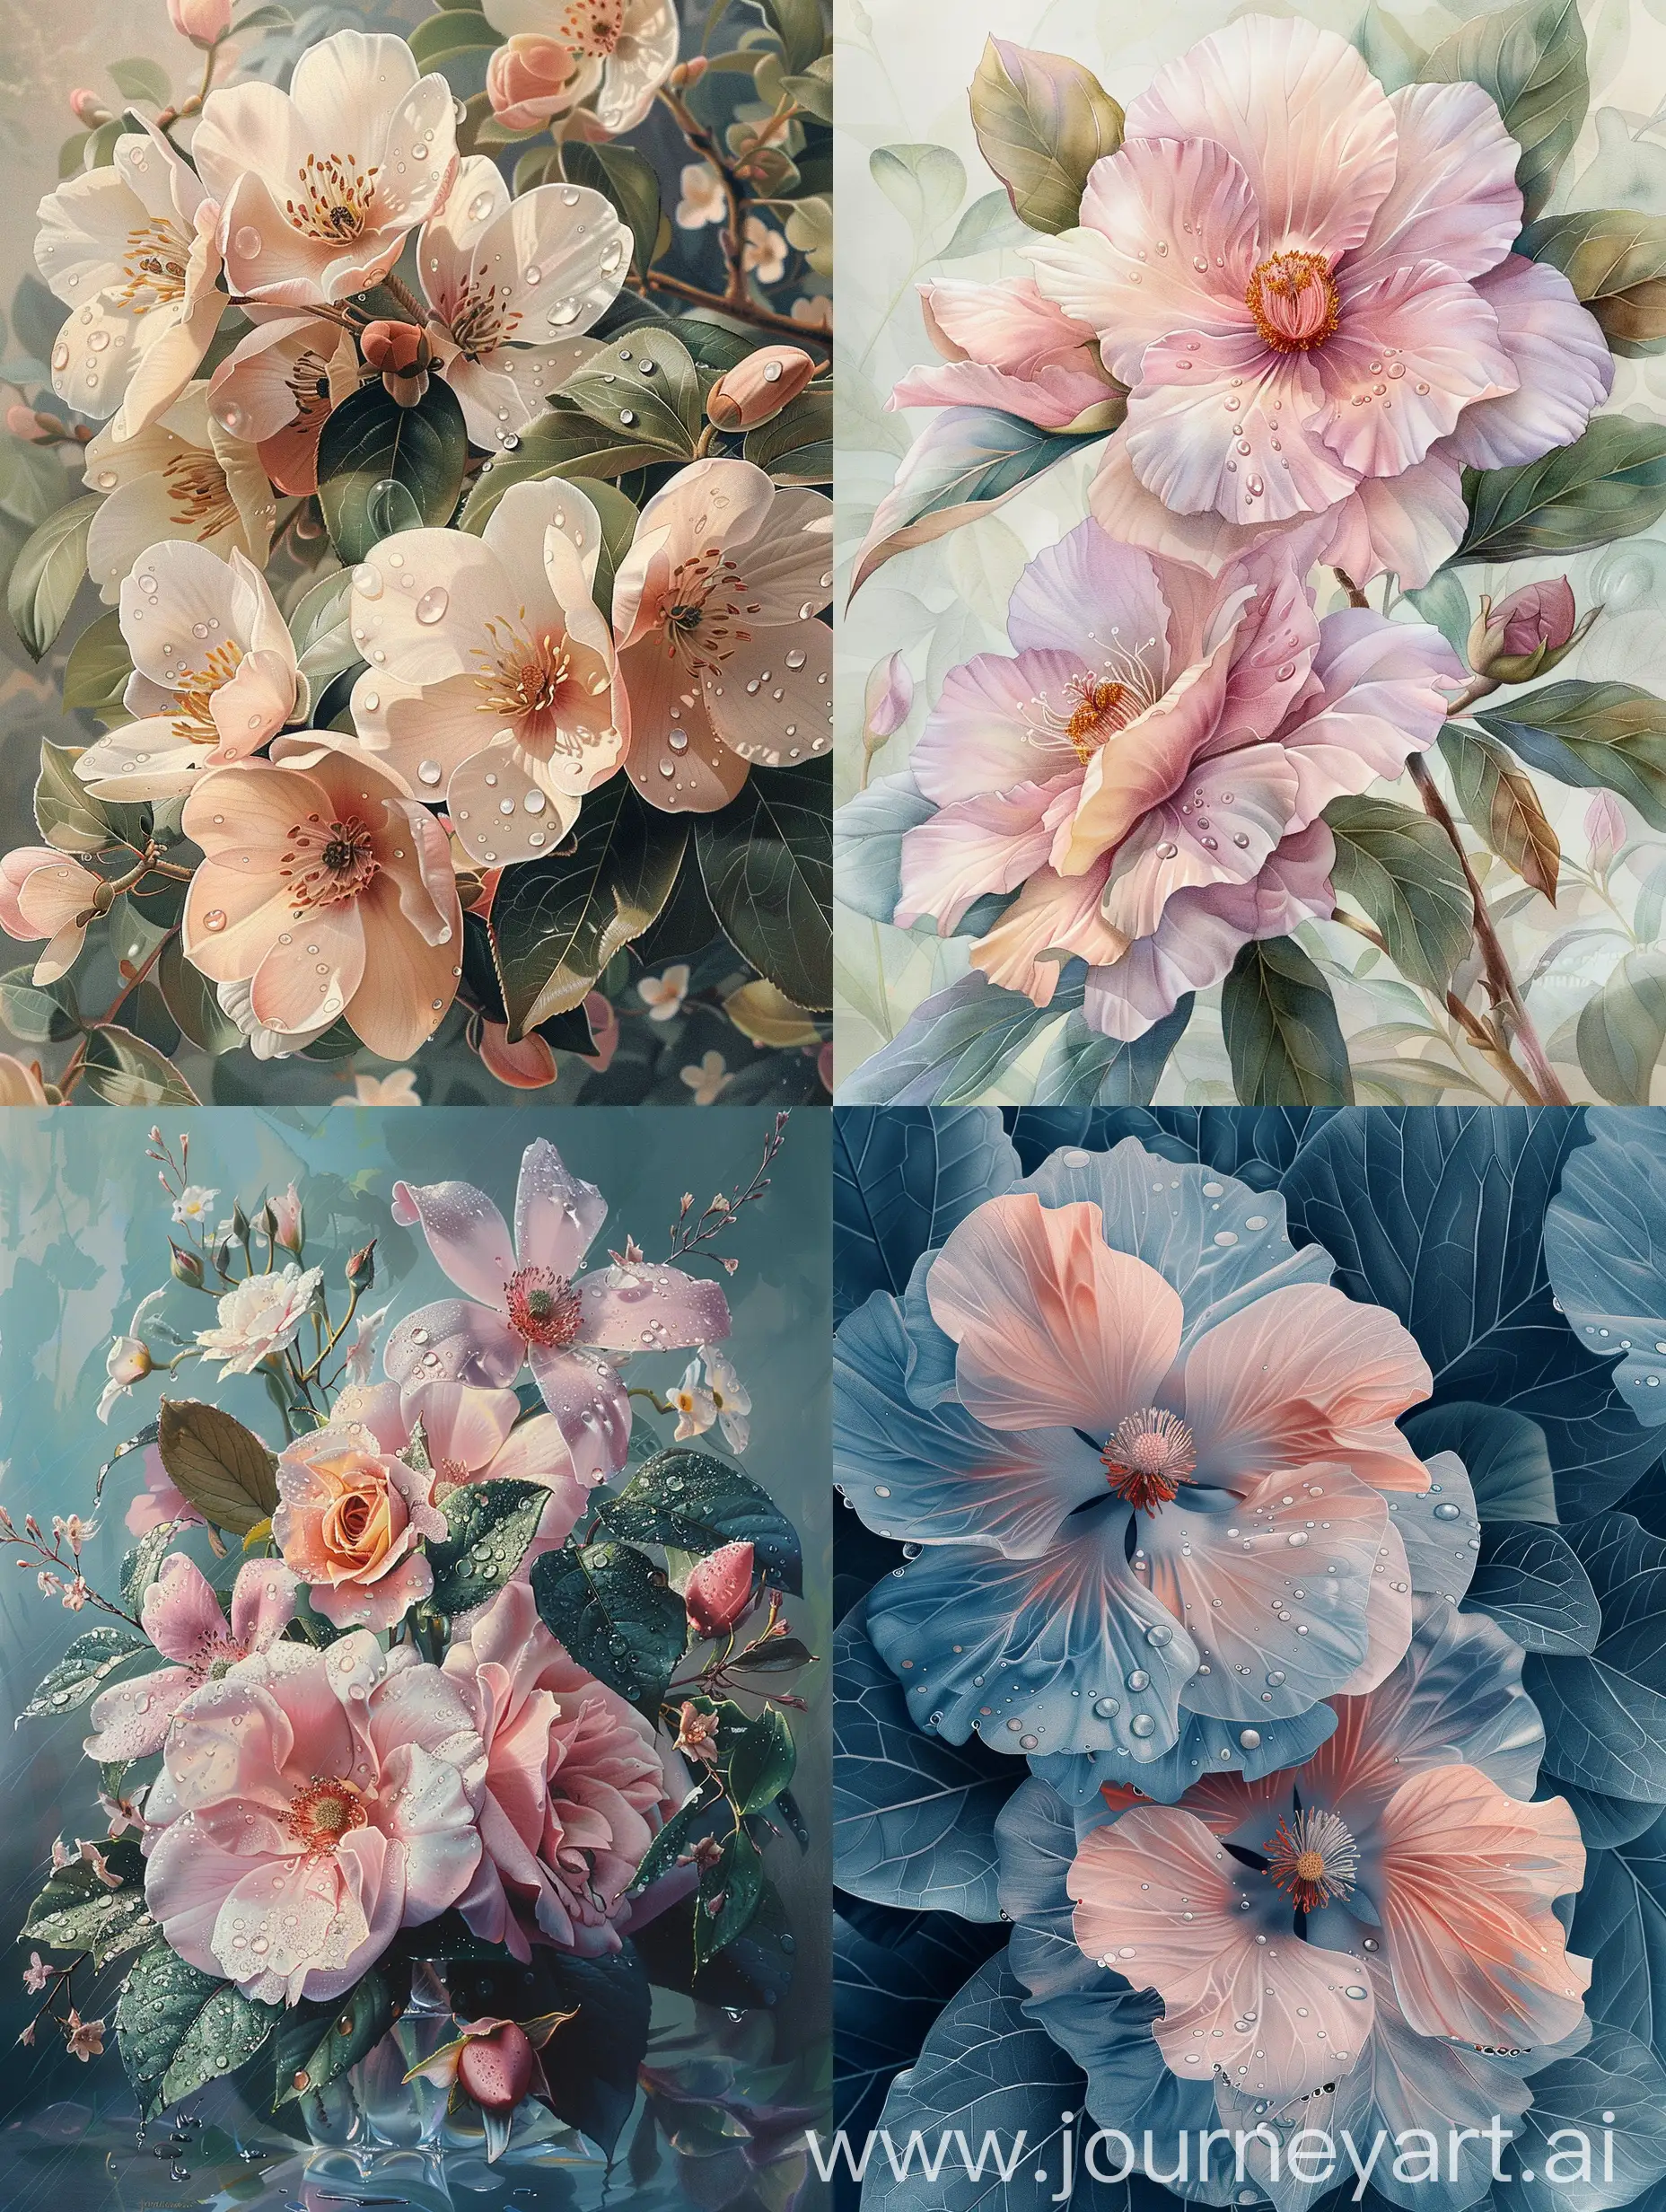 Ethereal-Garden-Realistic-Pastel-Florals-in-SunKissed-Spring-Bloom